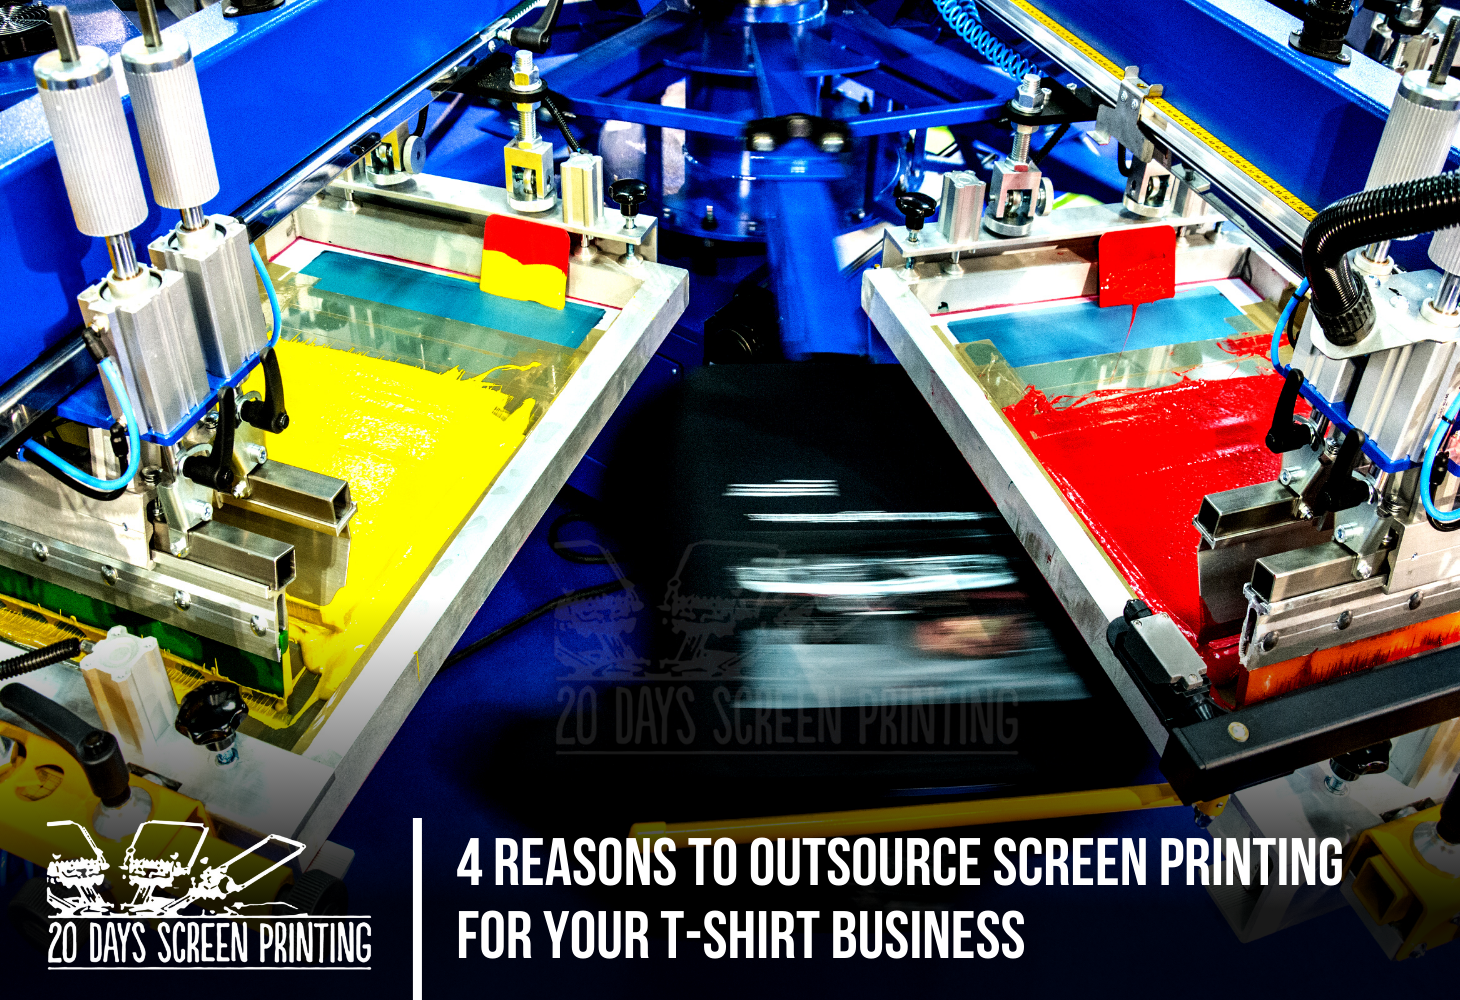 Machines screen printing t-shirts in different colors - outsource screen printing services.